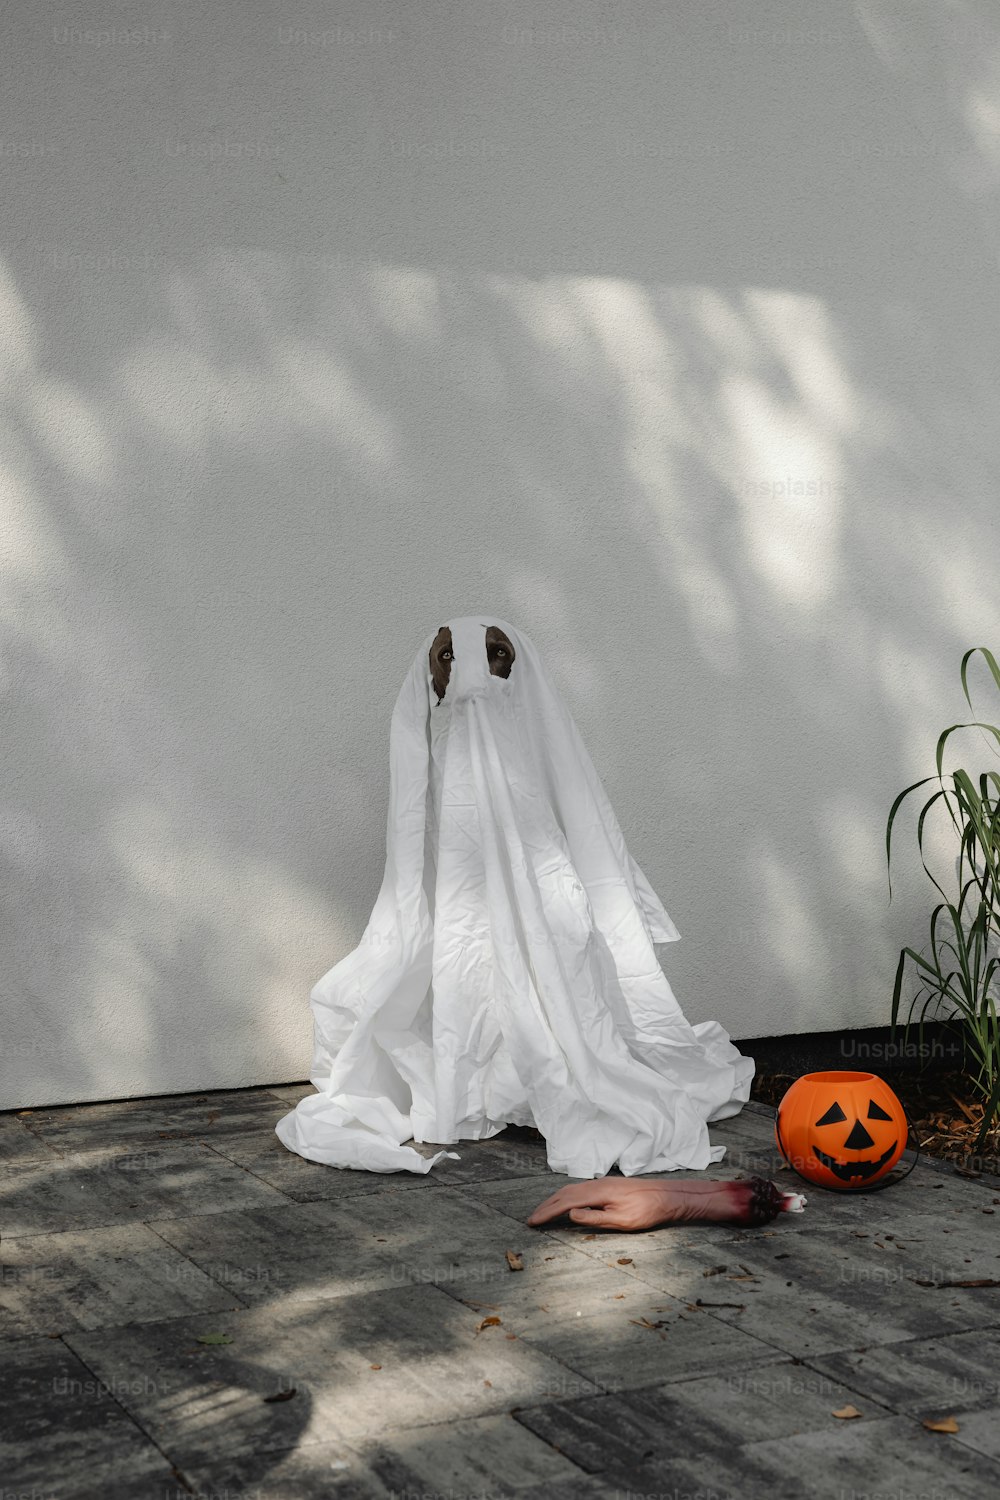 a ghostly ghost sitting on the ground next to a pumpkin